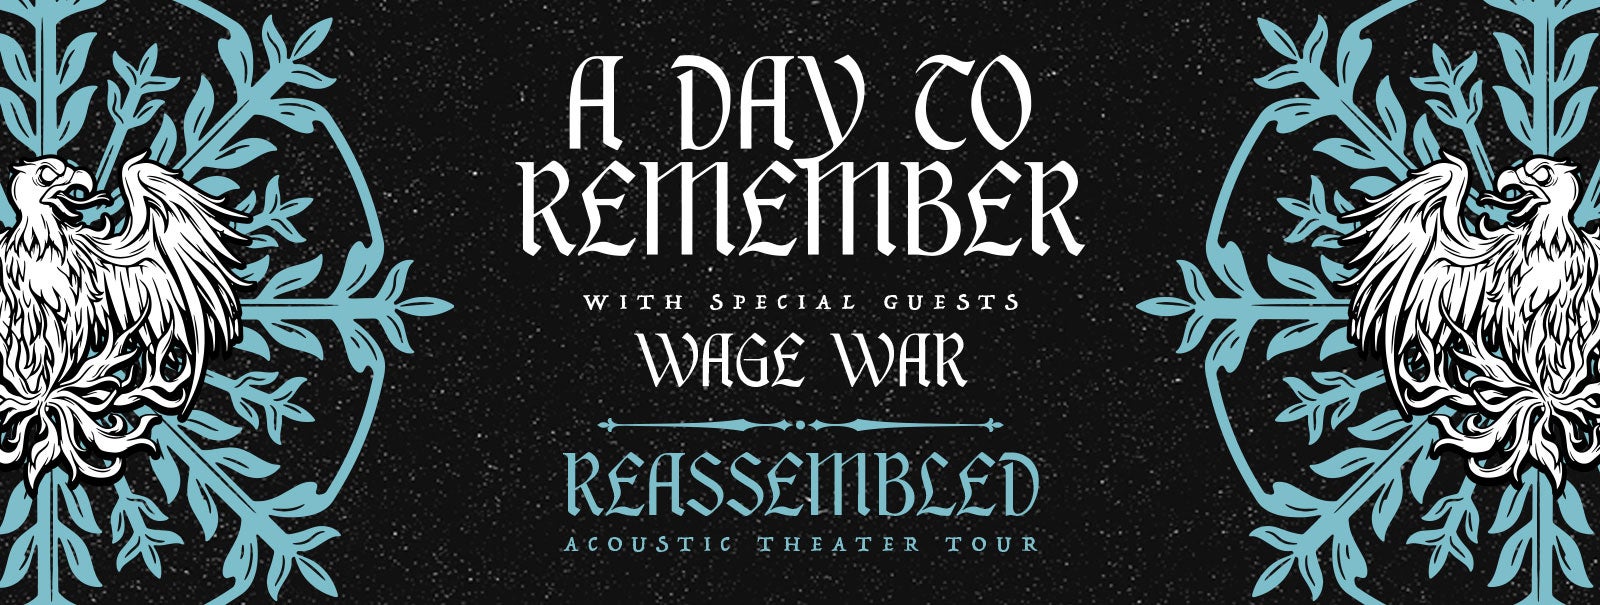 More Info - A Day To Remember - Reassembled: Acoustic Theater Tour 2022